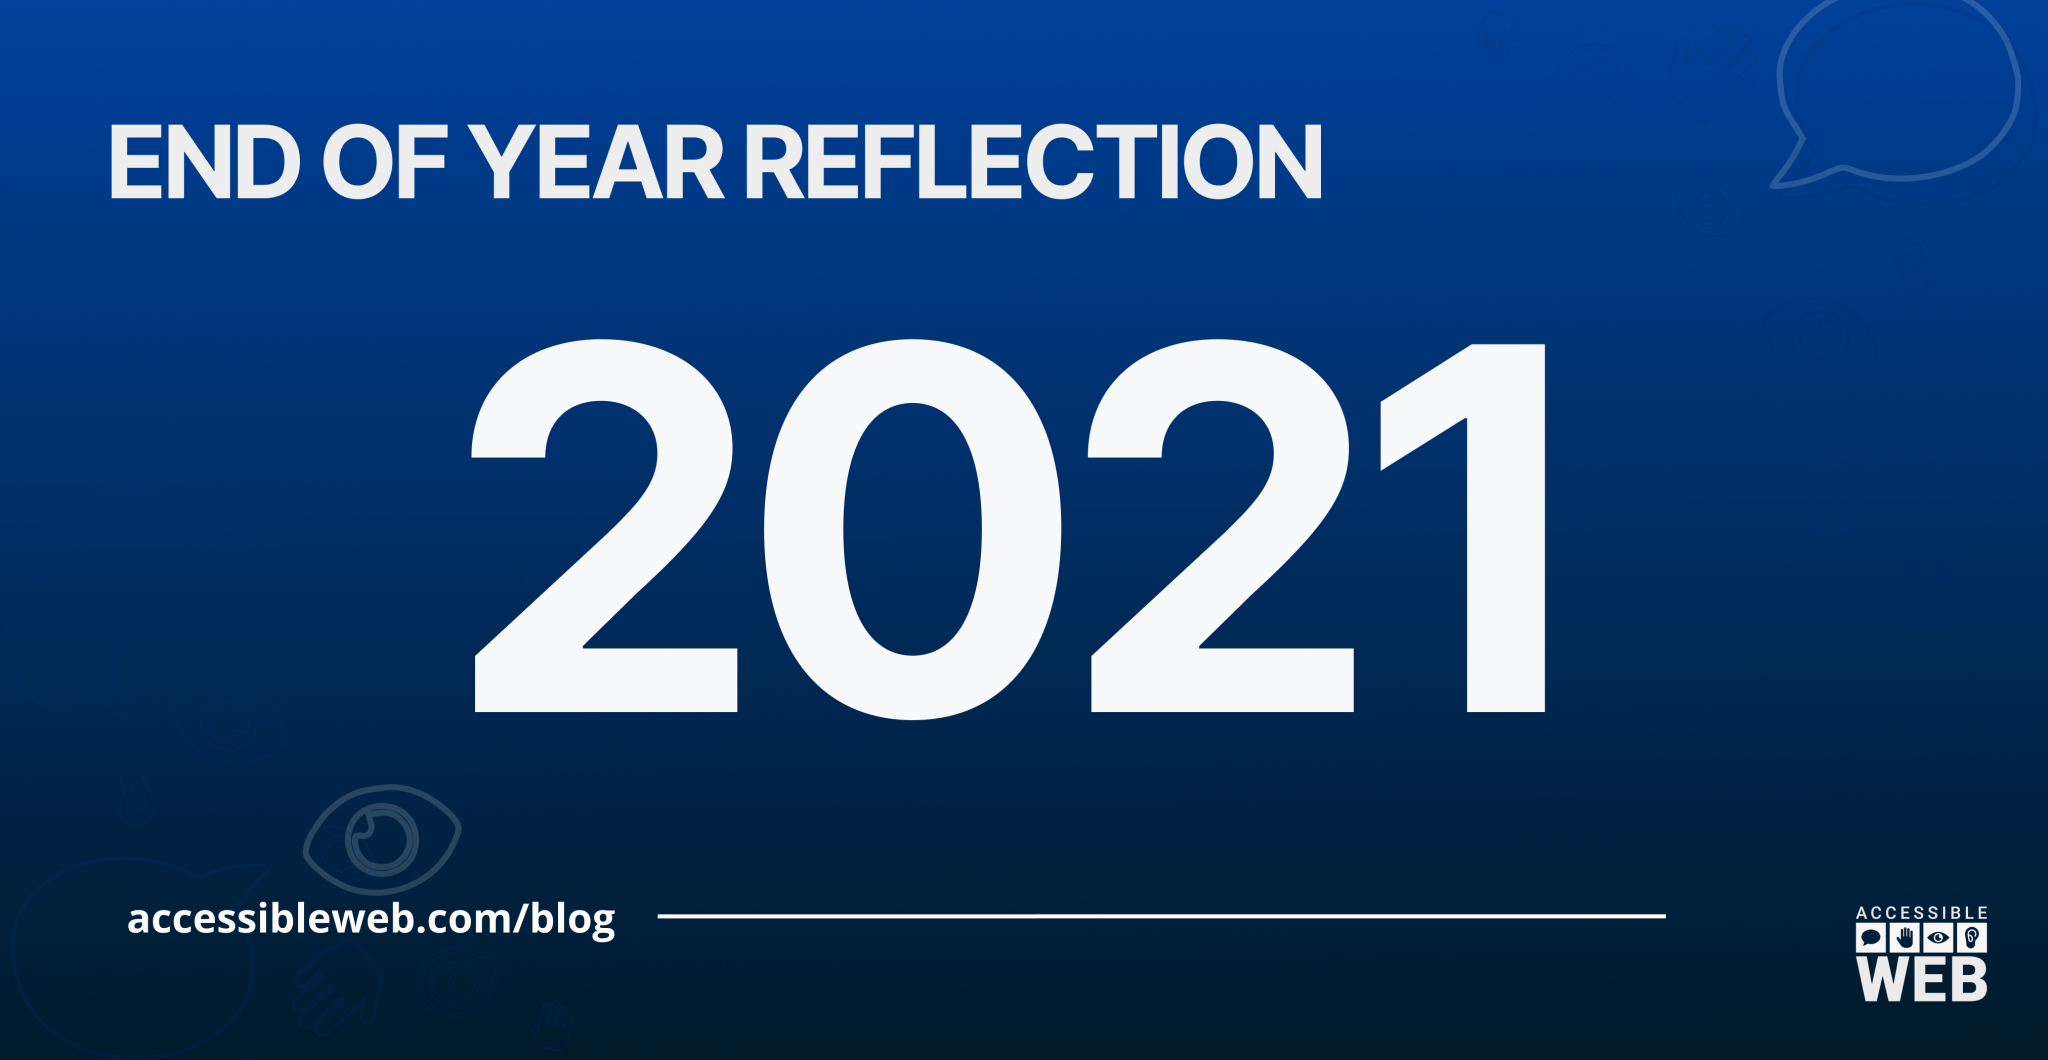 "end of year reflection 2021"